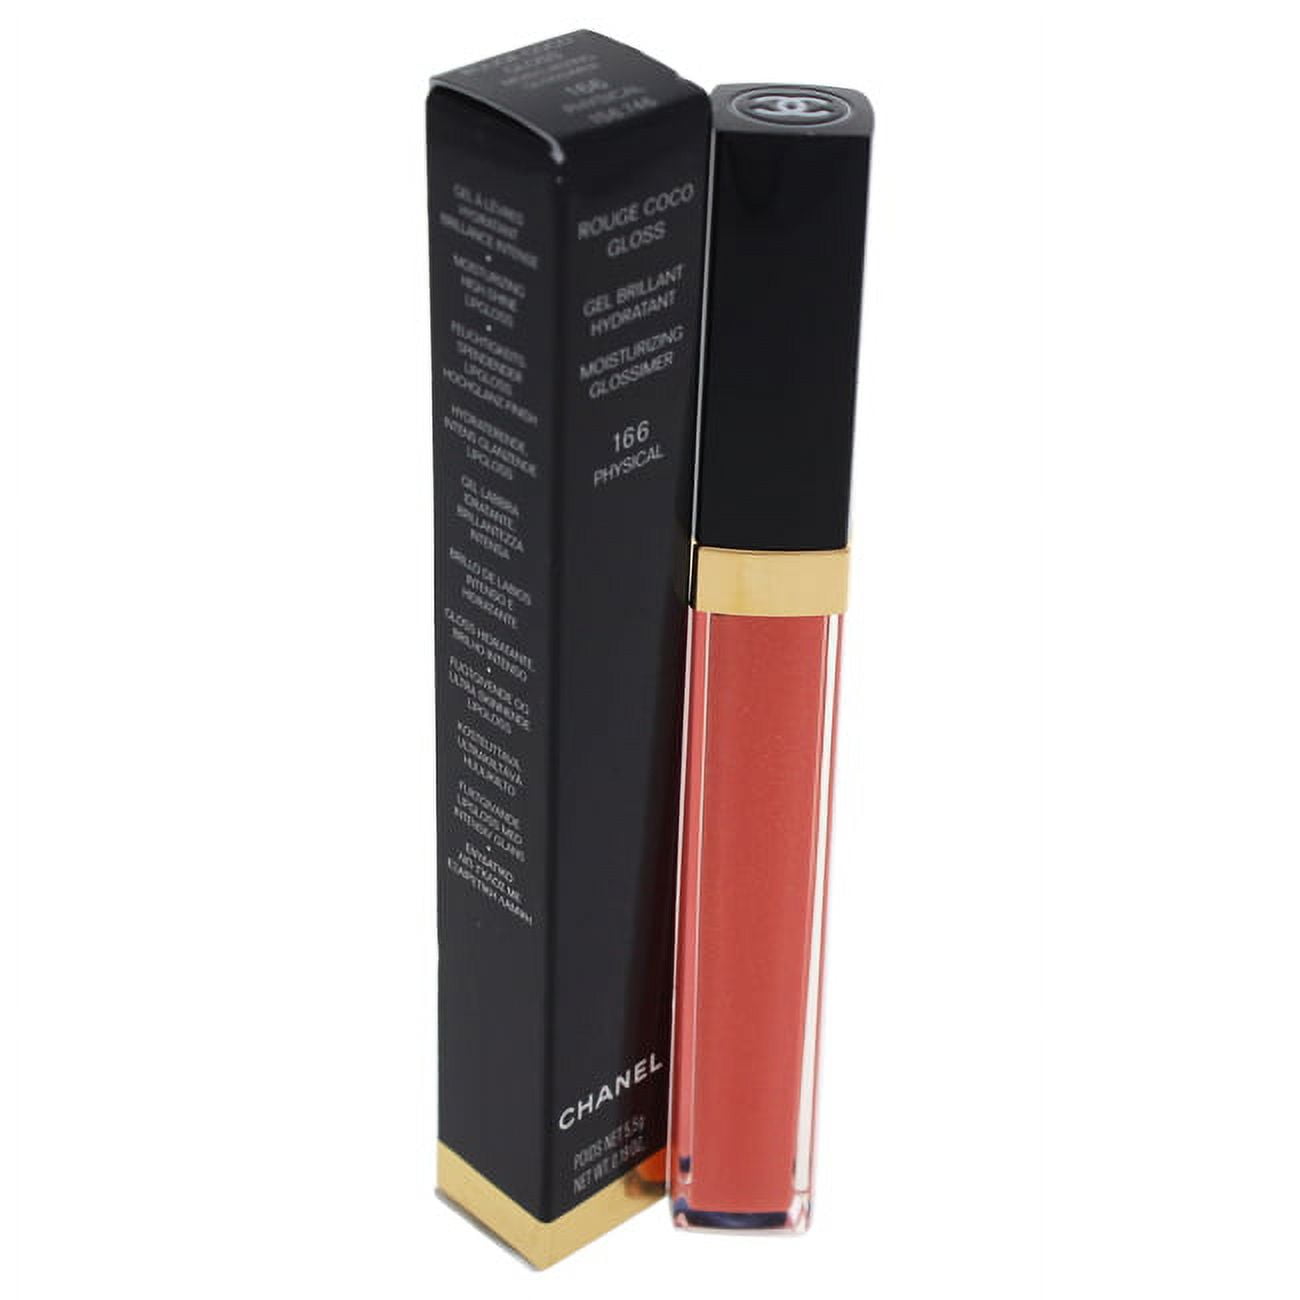 Chanel Rouge Coco Gloss Moisturizing Glossimer - # 722 Noce Moscata 5.5g